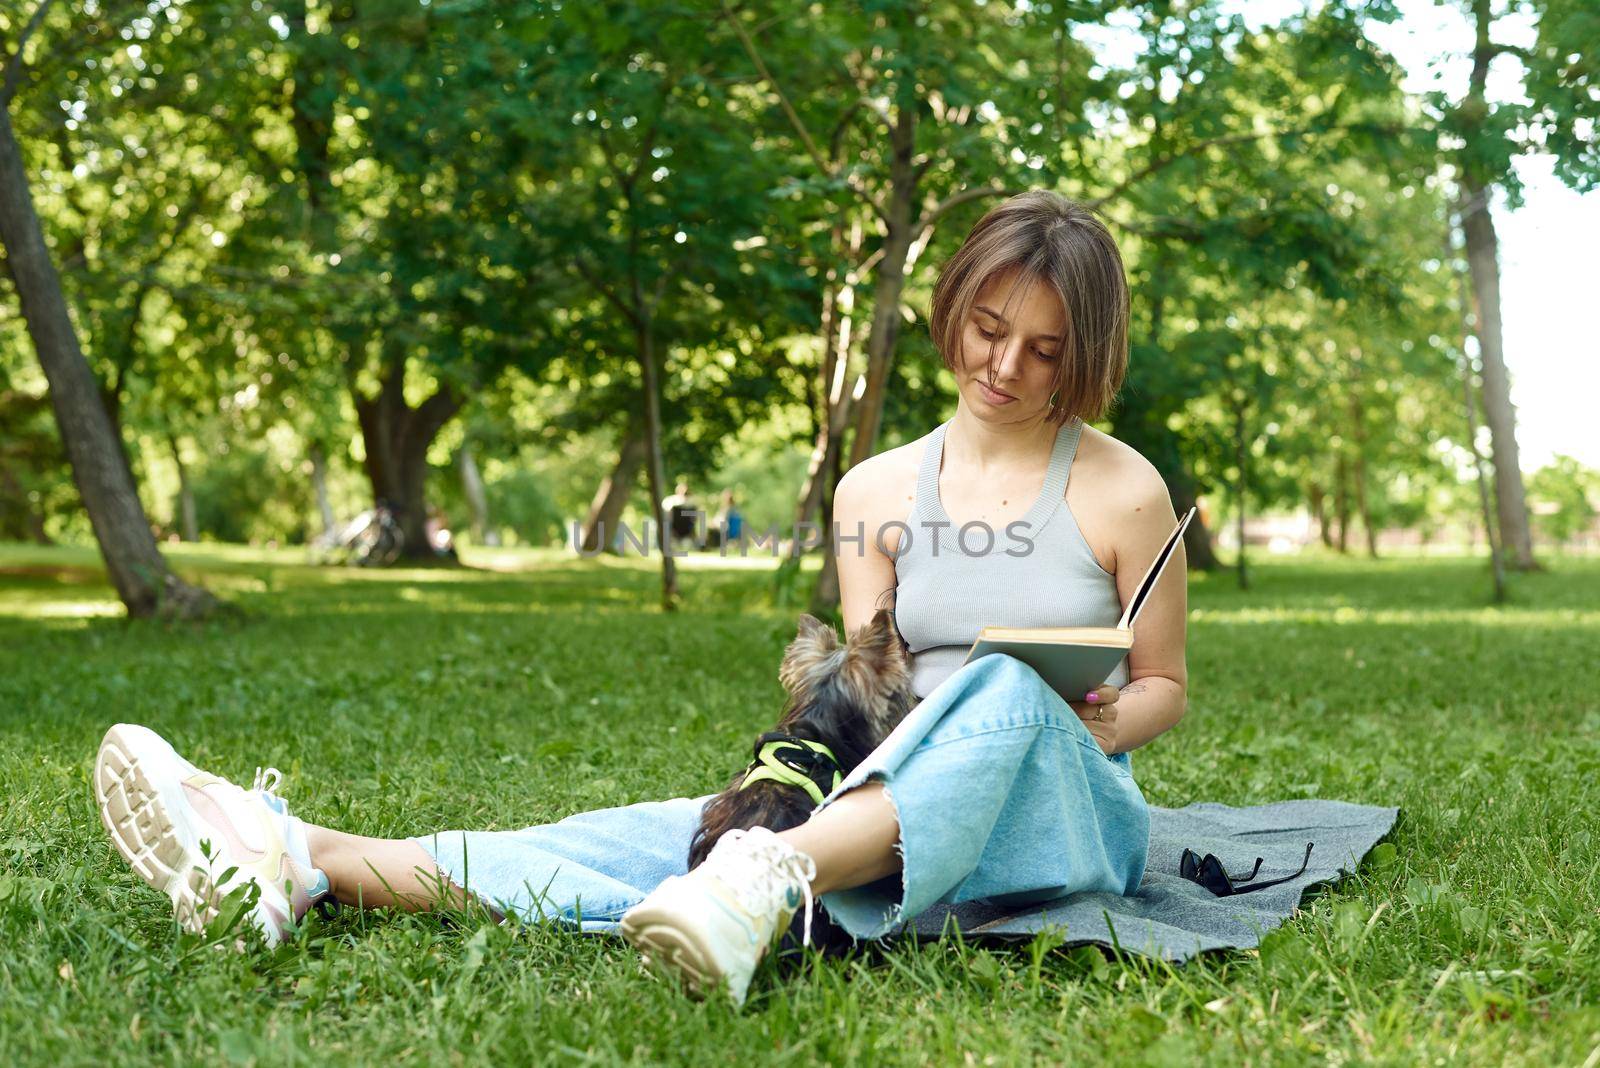 A young woman reads a book in nature next to her small dog Yorshir Terrier.